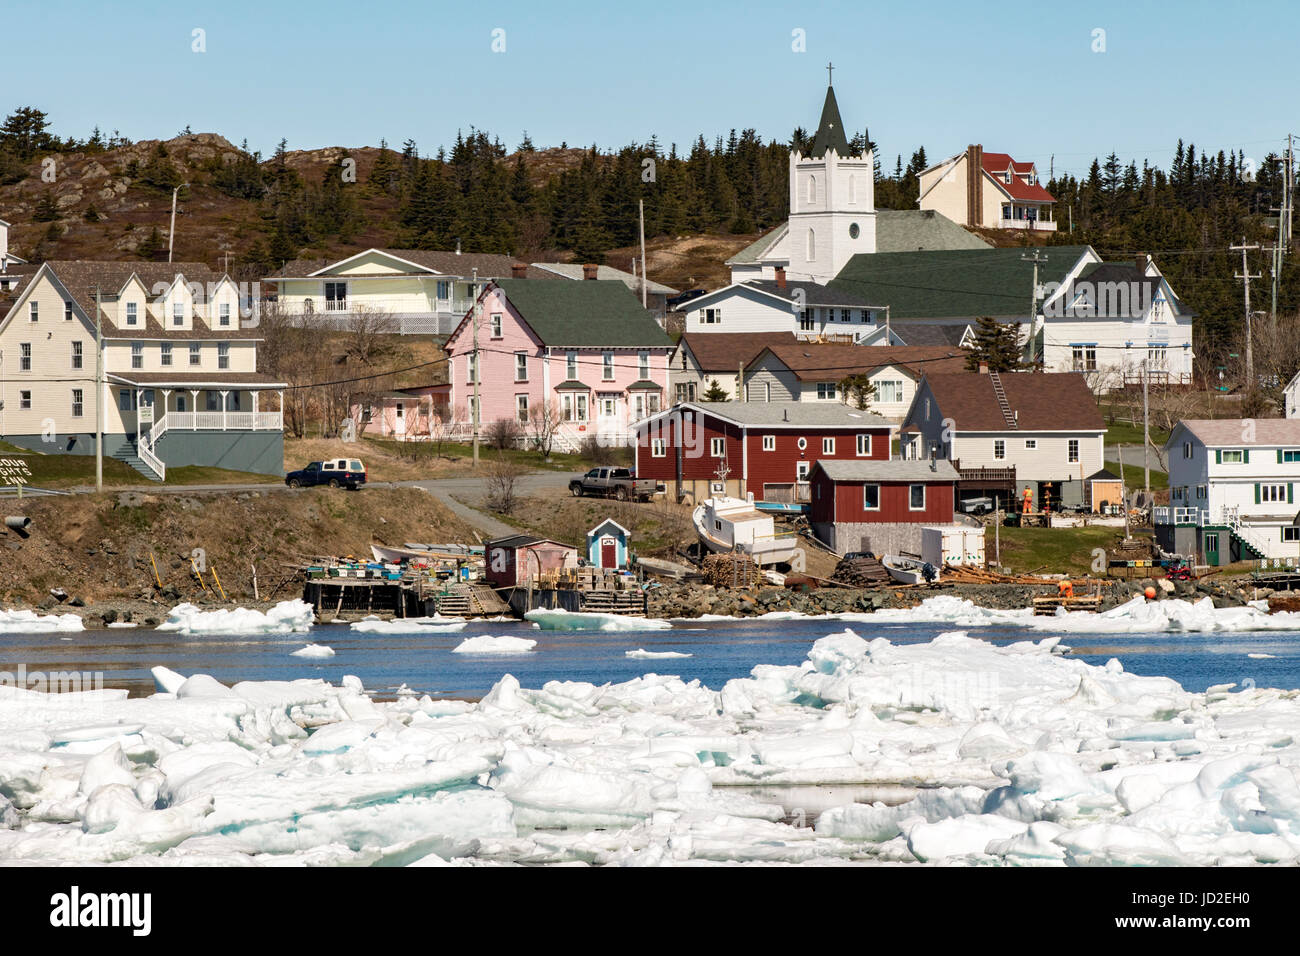 Views of the town of Twillingate from Twillingate Harbour - Newfoundland, Canada Stock Photo